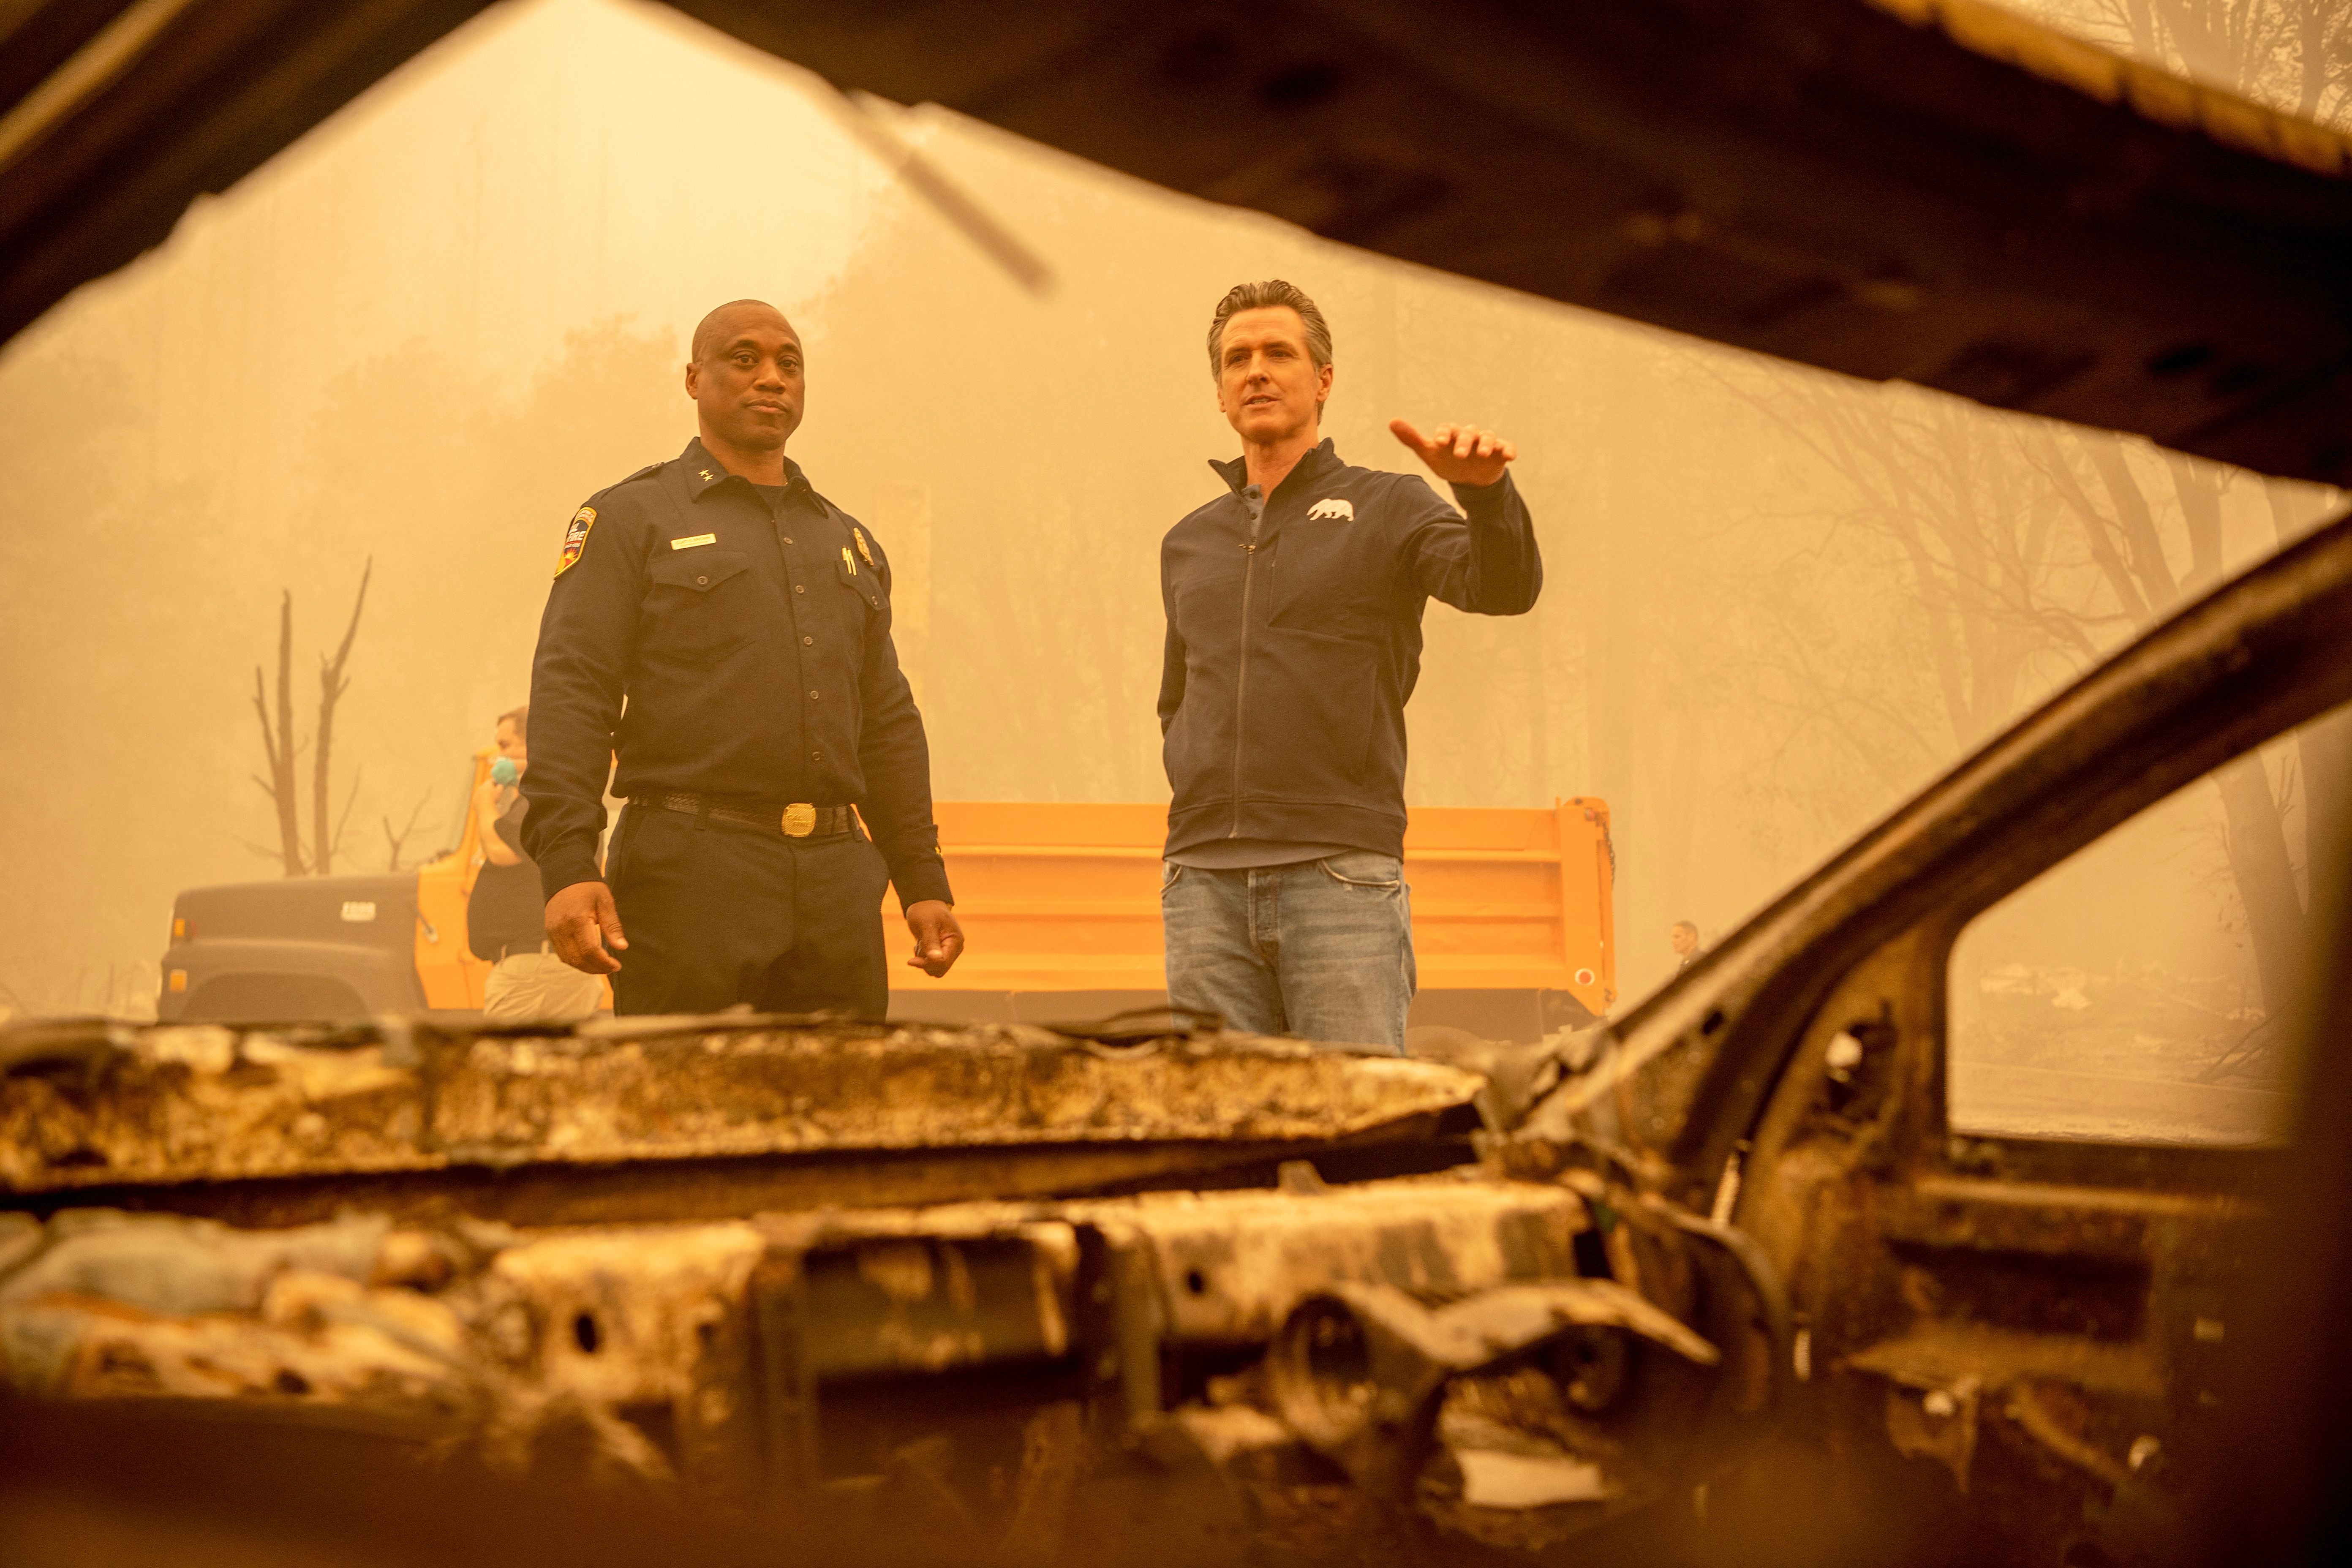 California Governor Gavin Newsom (R) looks at a burned vehicle alongside Assistant Region Chief for Cal Fire Curtis Brown (L) in downtown Greenville on Saturday